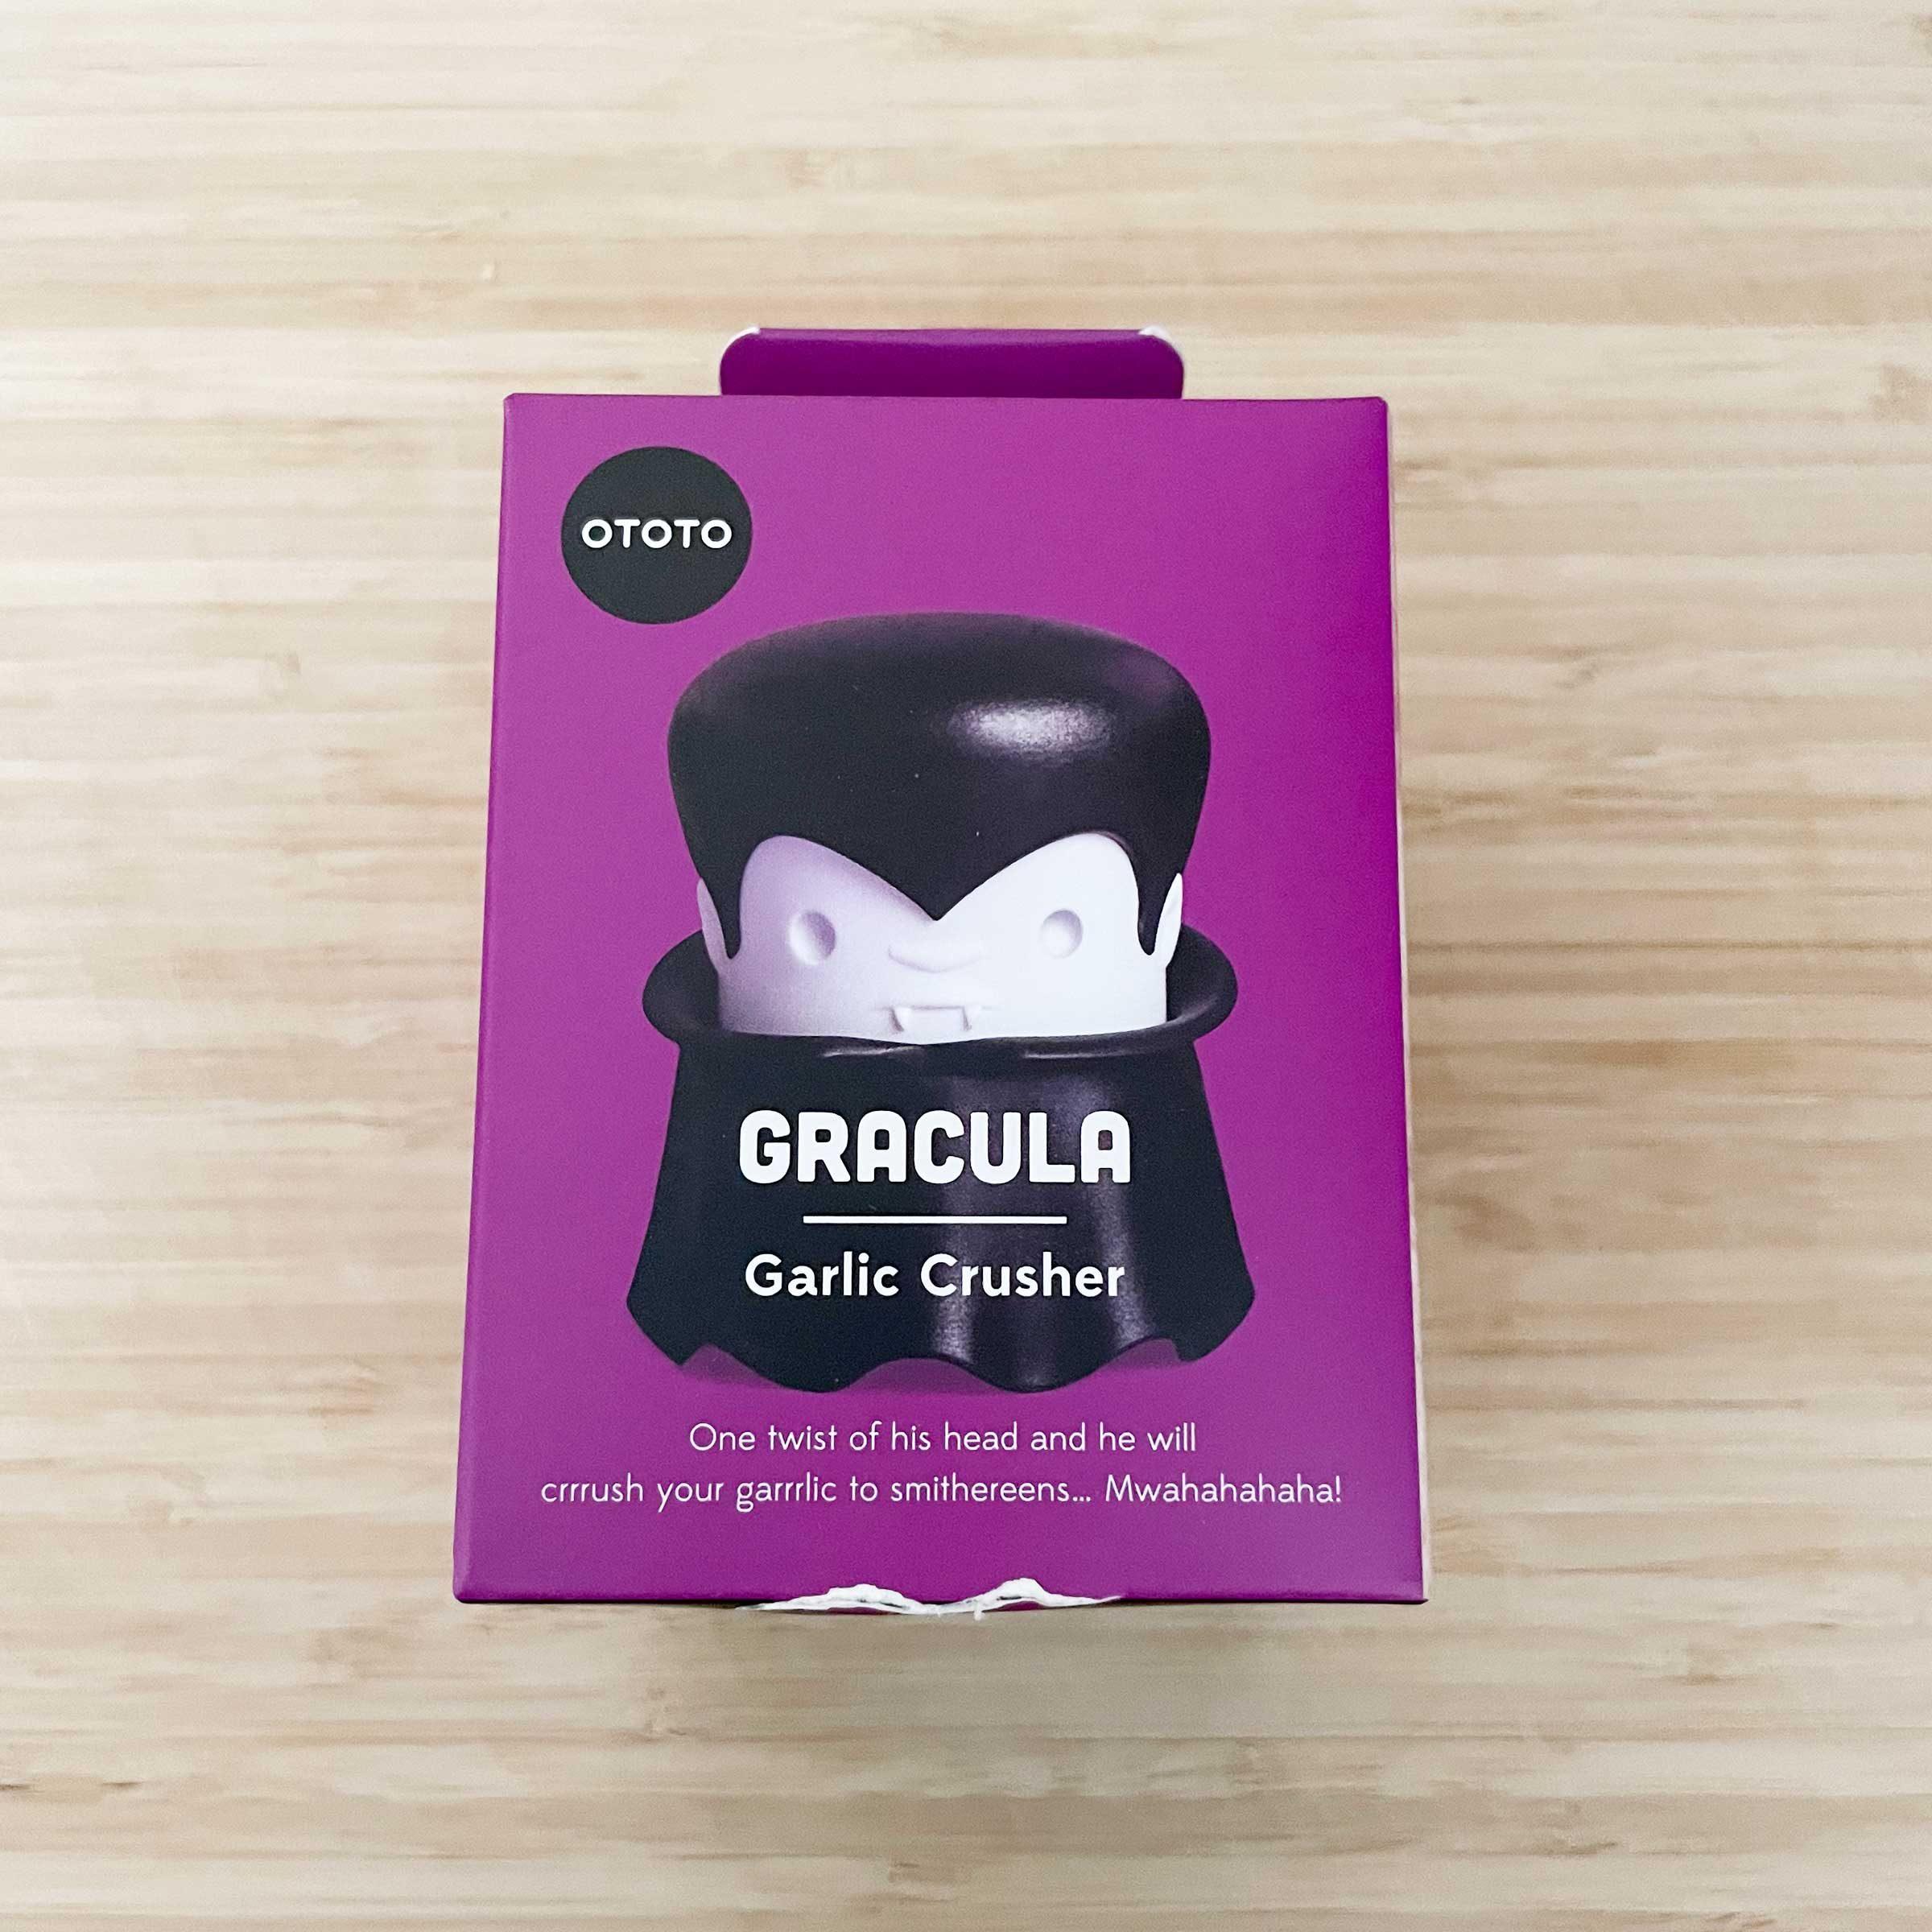 We're Obsessed with This Best-Selling Gracula Garlic Crusher